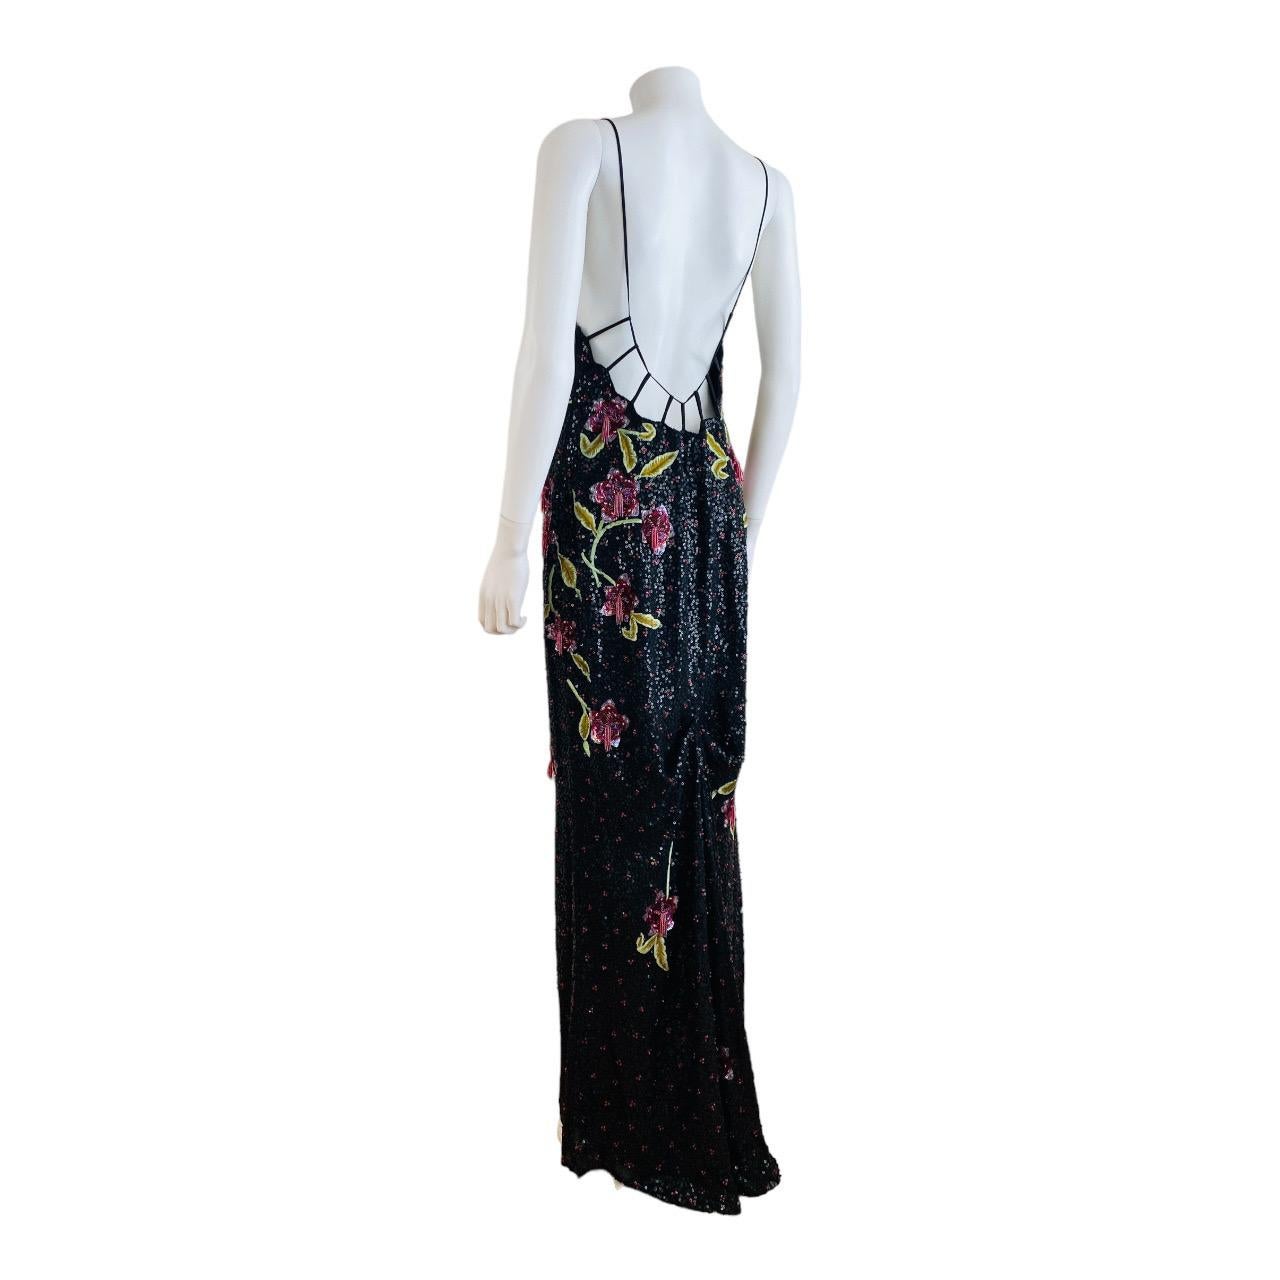 Vintage 2002 Escada Hand Beaded Sequin Floral Maxi Dress Gown Black Pink Flowers 6